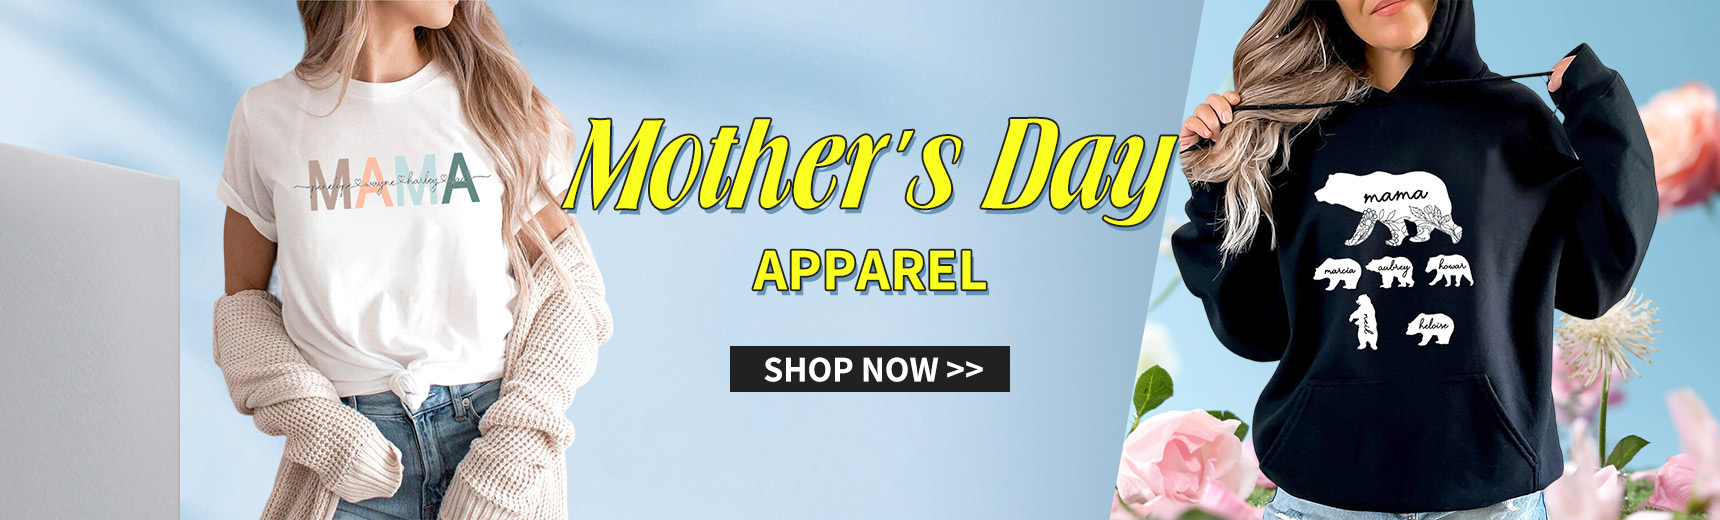 MOTHER'S DAY APPAREL